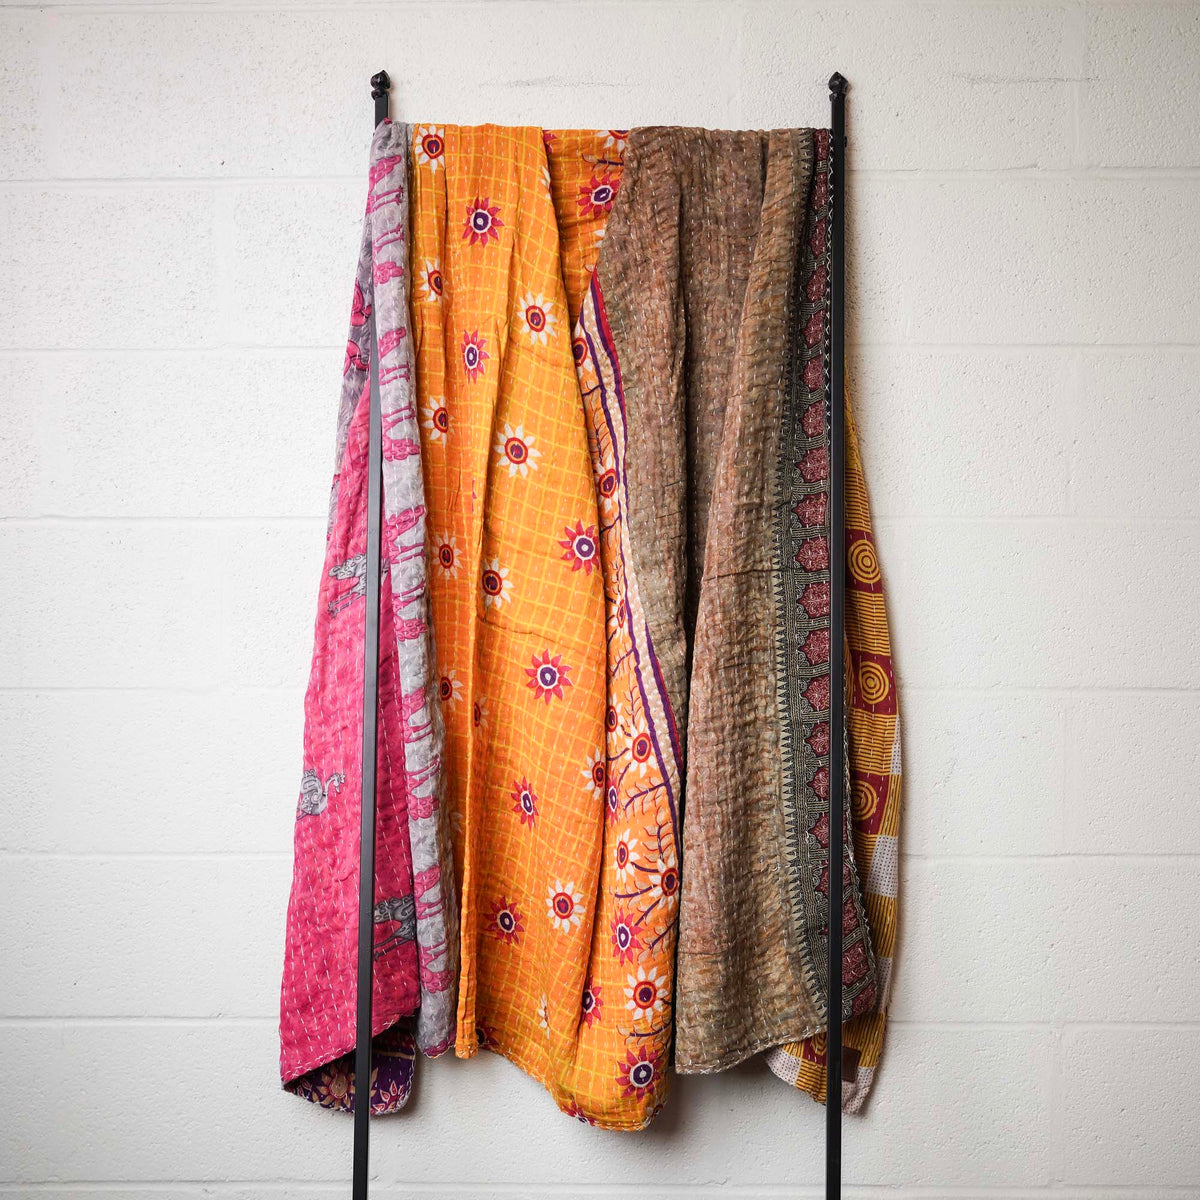 Kantha India Blanket One-of-a-Kind Handcrafted Quilted Pattern Throw ~ No. K-00582